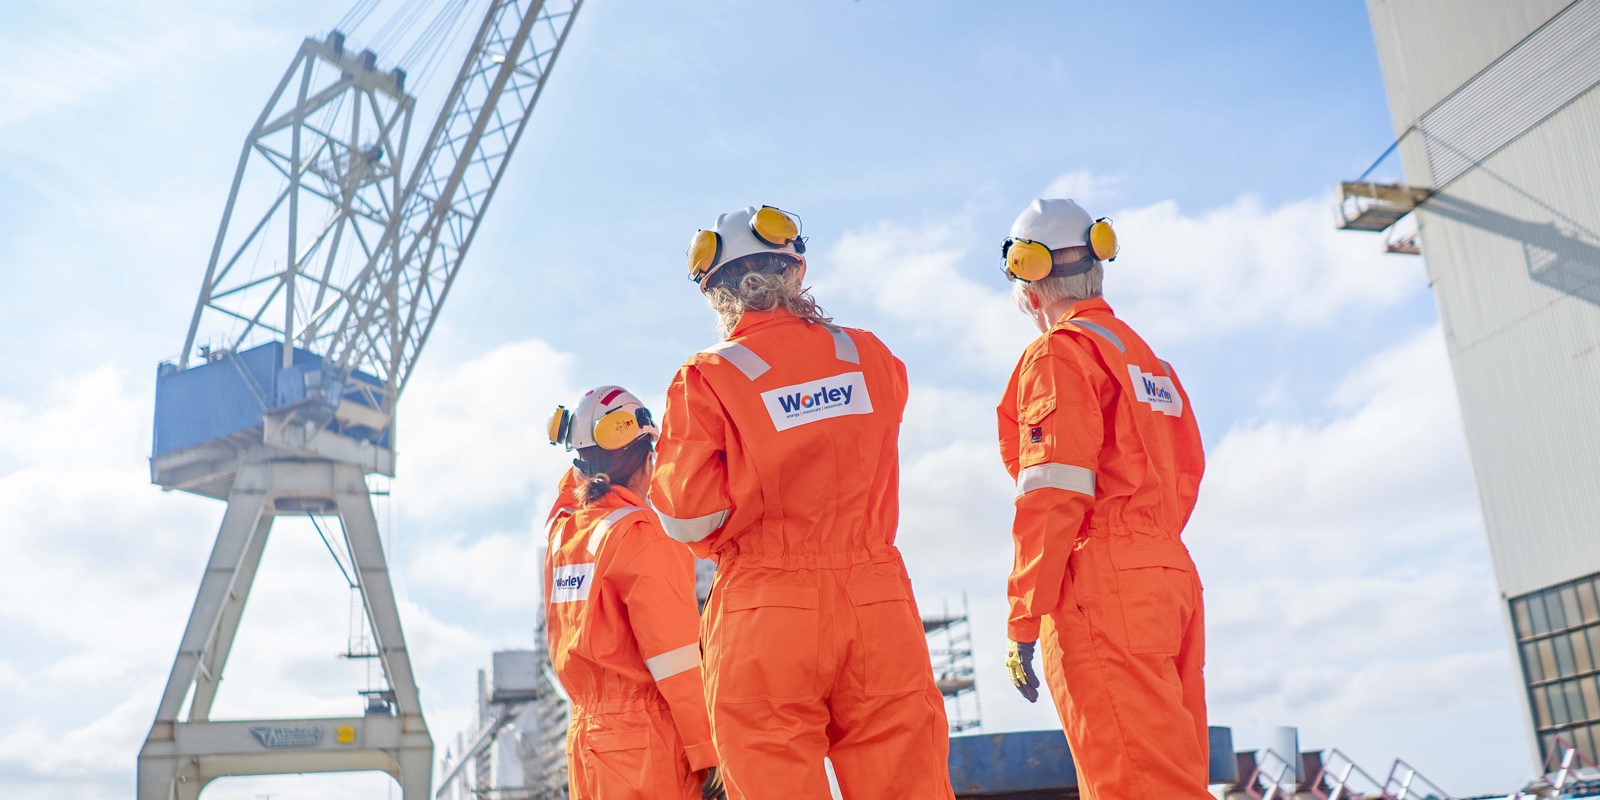 Worley bags 10-year deal for Chevron’s onshore and offshore asset portfolio